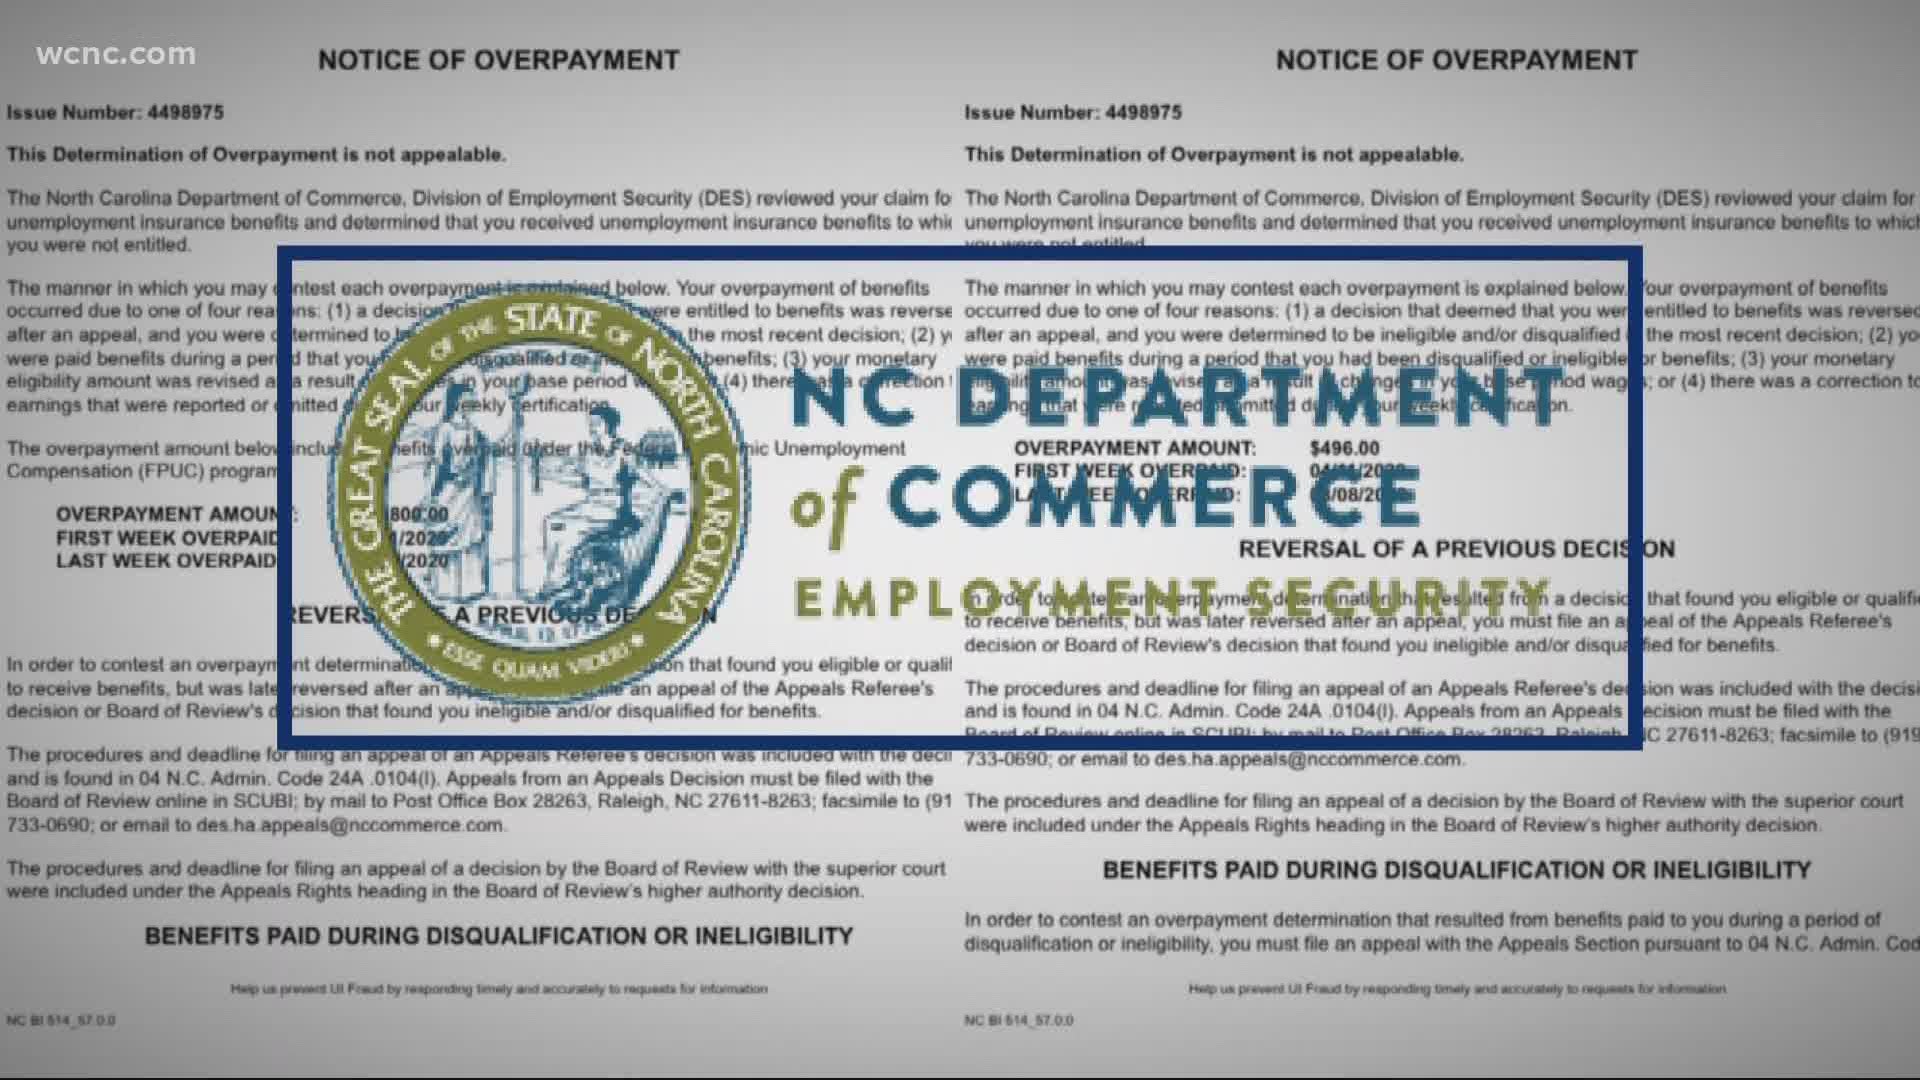 Shelley Grassi wrongly received standard unemployment instead of PUA, which resulted in overpayment notices. DES fixed the error after WCNC Charlotte's questions.